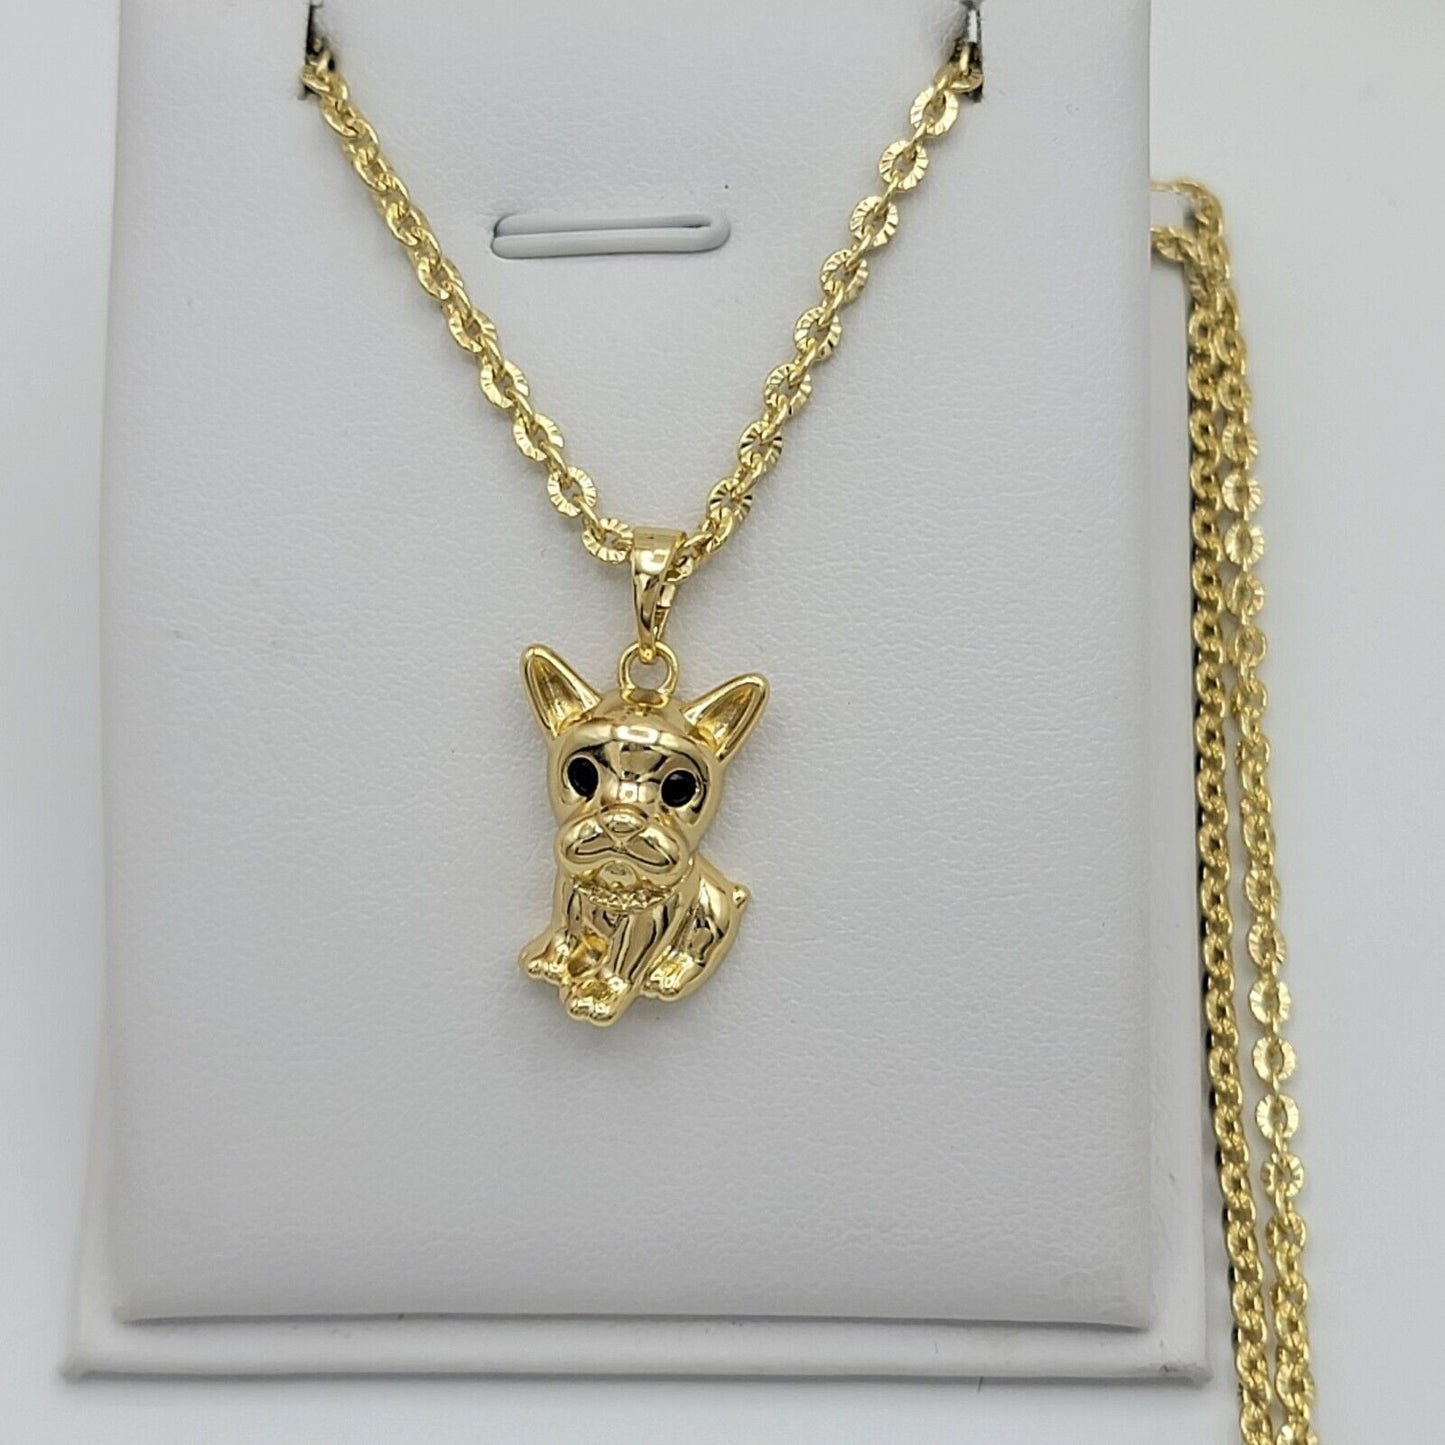 Necklaces - 14K Gold Plated. French Bulldog Pendant & Chain.